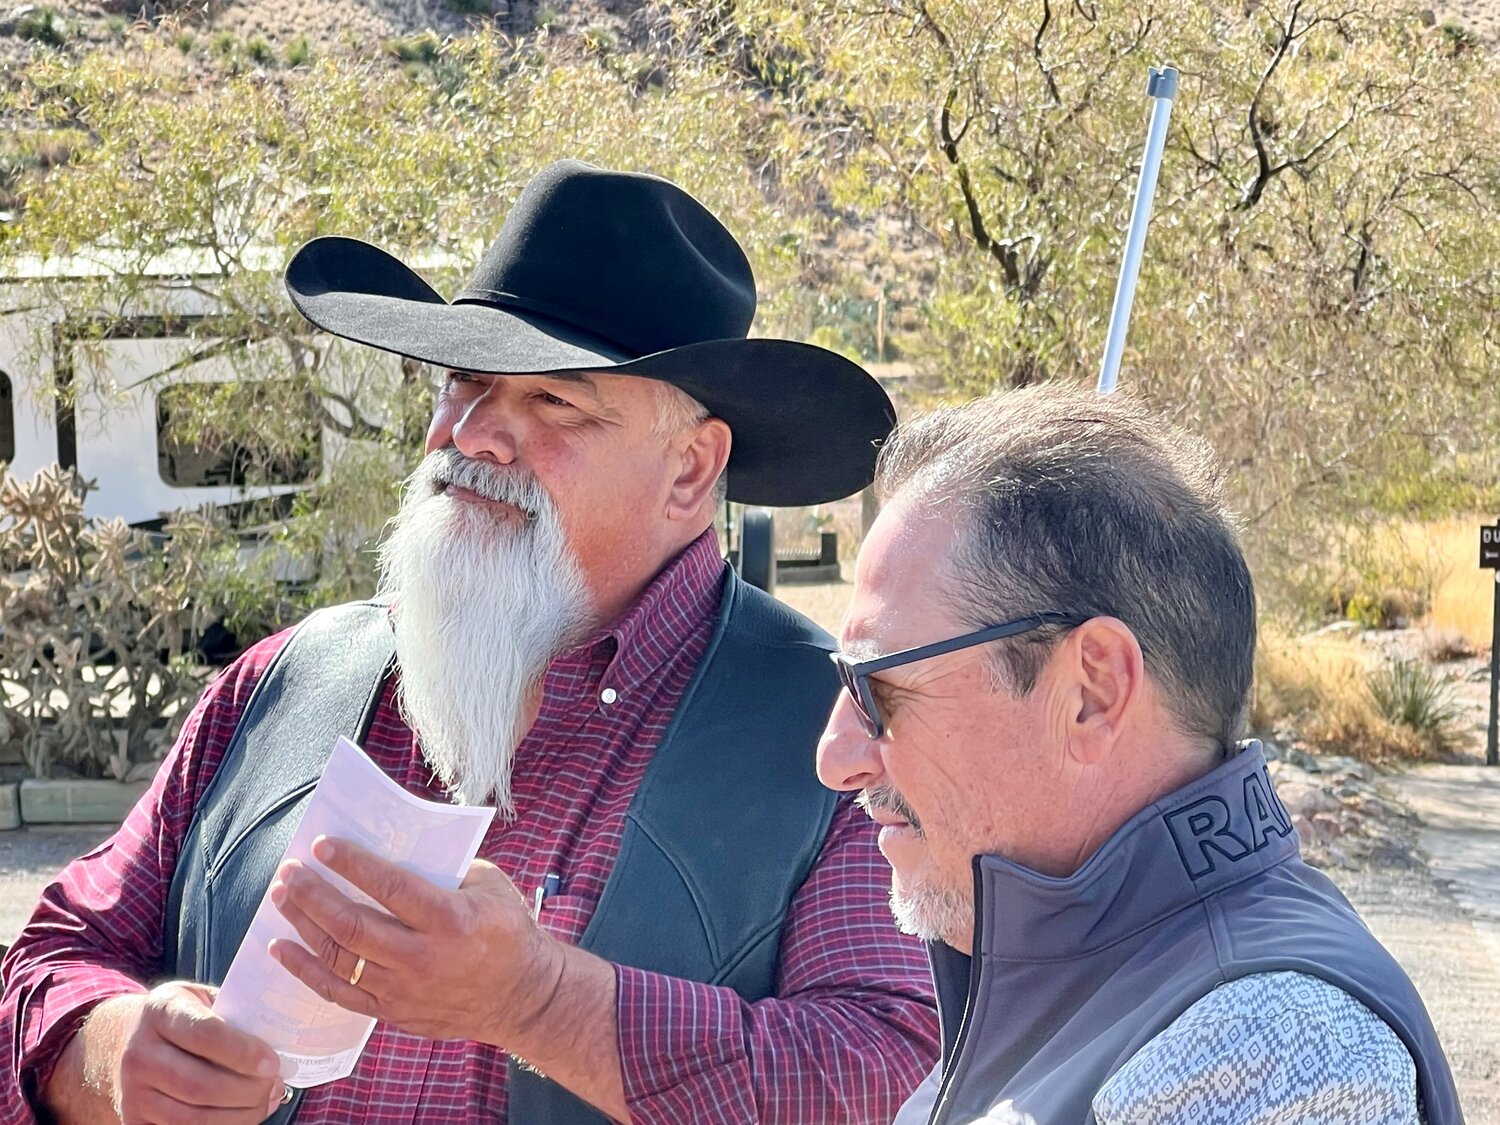 Luna County rancher Eddie Mesa, left, was among the spectators who confronted Luna County Commissioner Ray Trejo, right, and other proponents of a Luna County national monument after a campaign launch event at Rockhound State Park near Deming on Dec. 6.